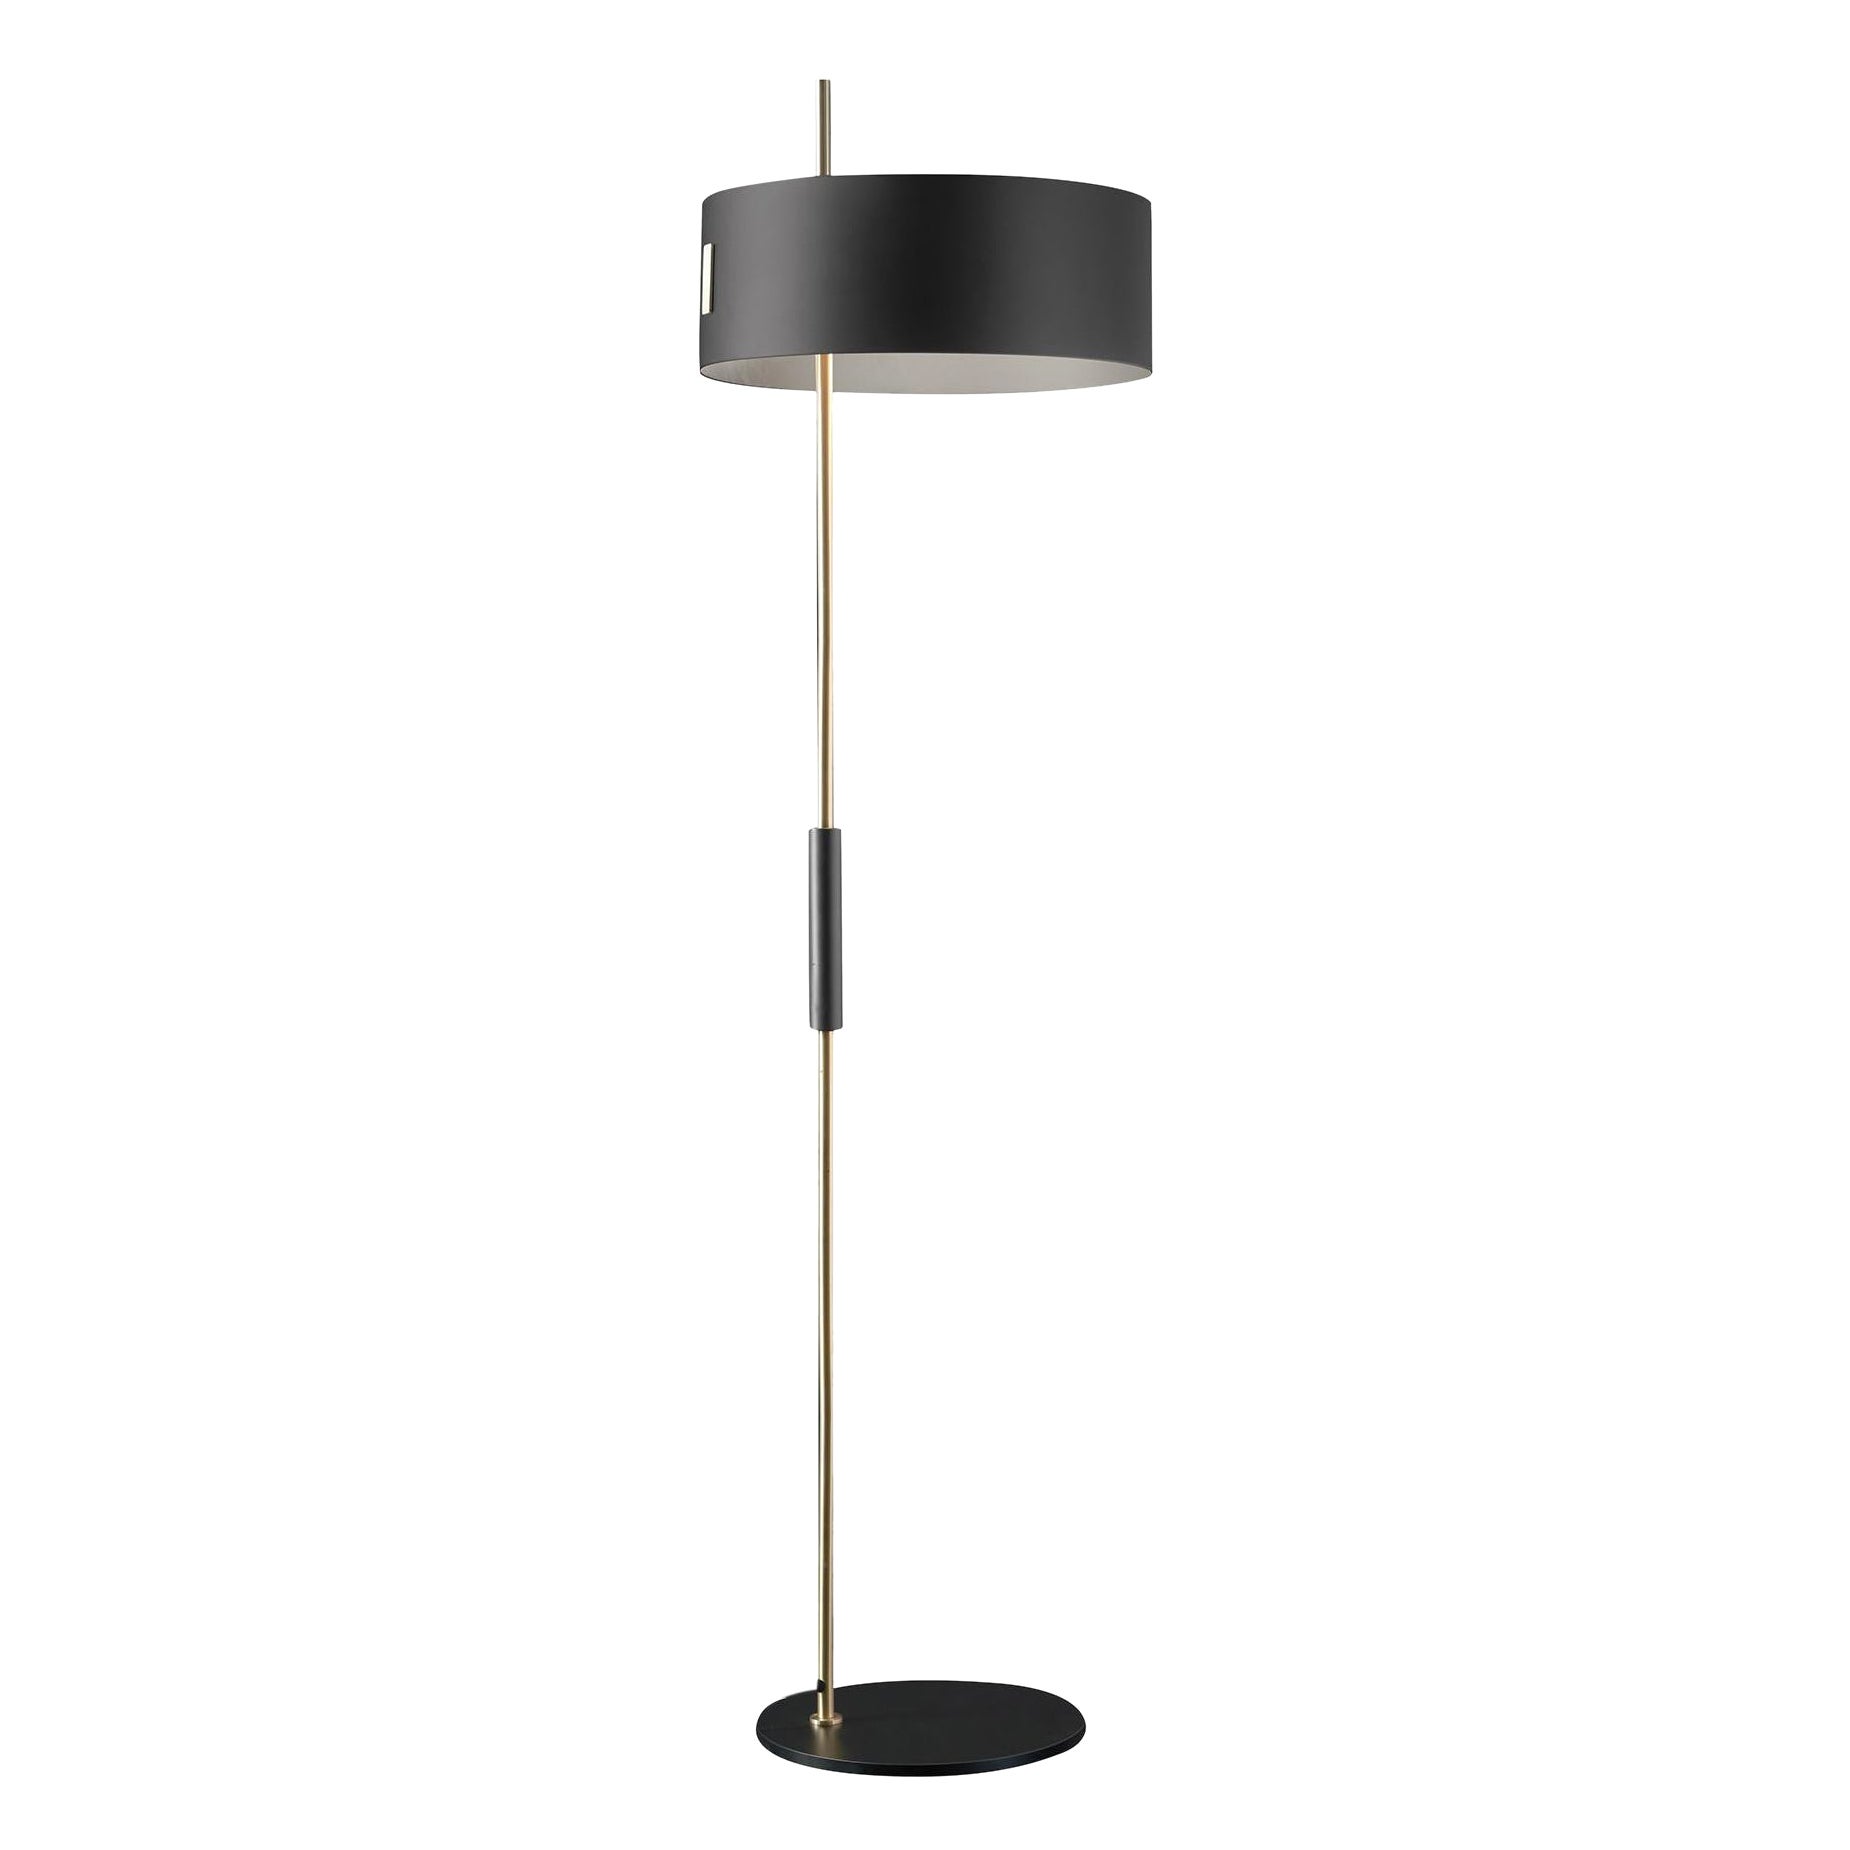 Ostuni and Forti 1953 Floor Lamp by Oluce For Sale